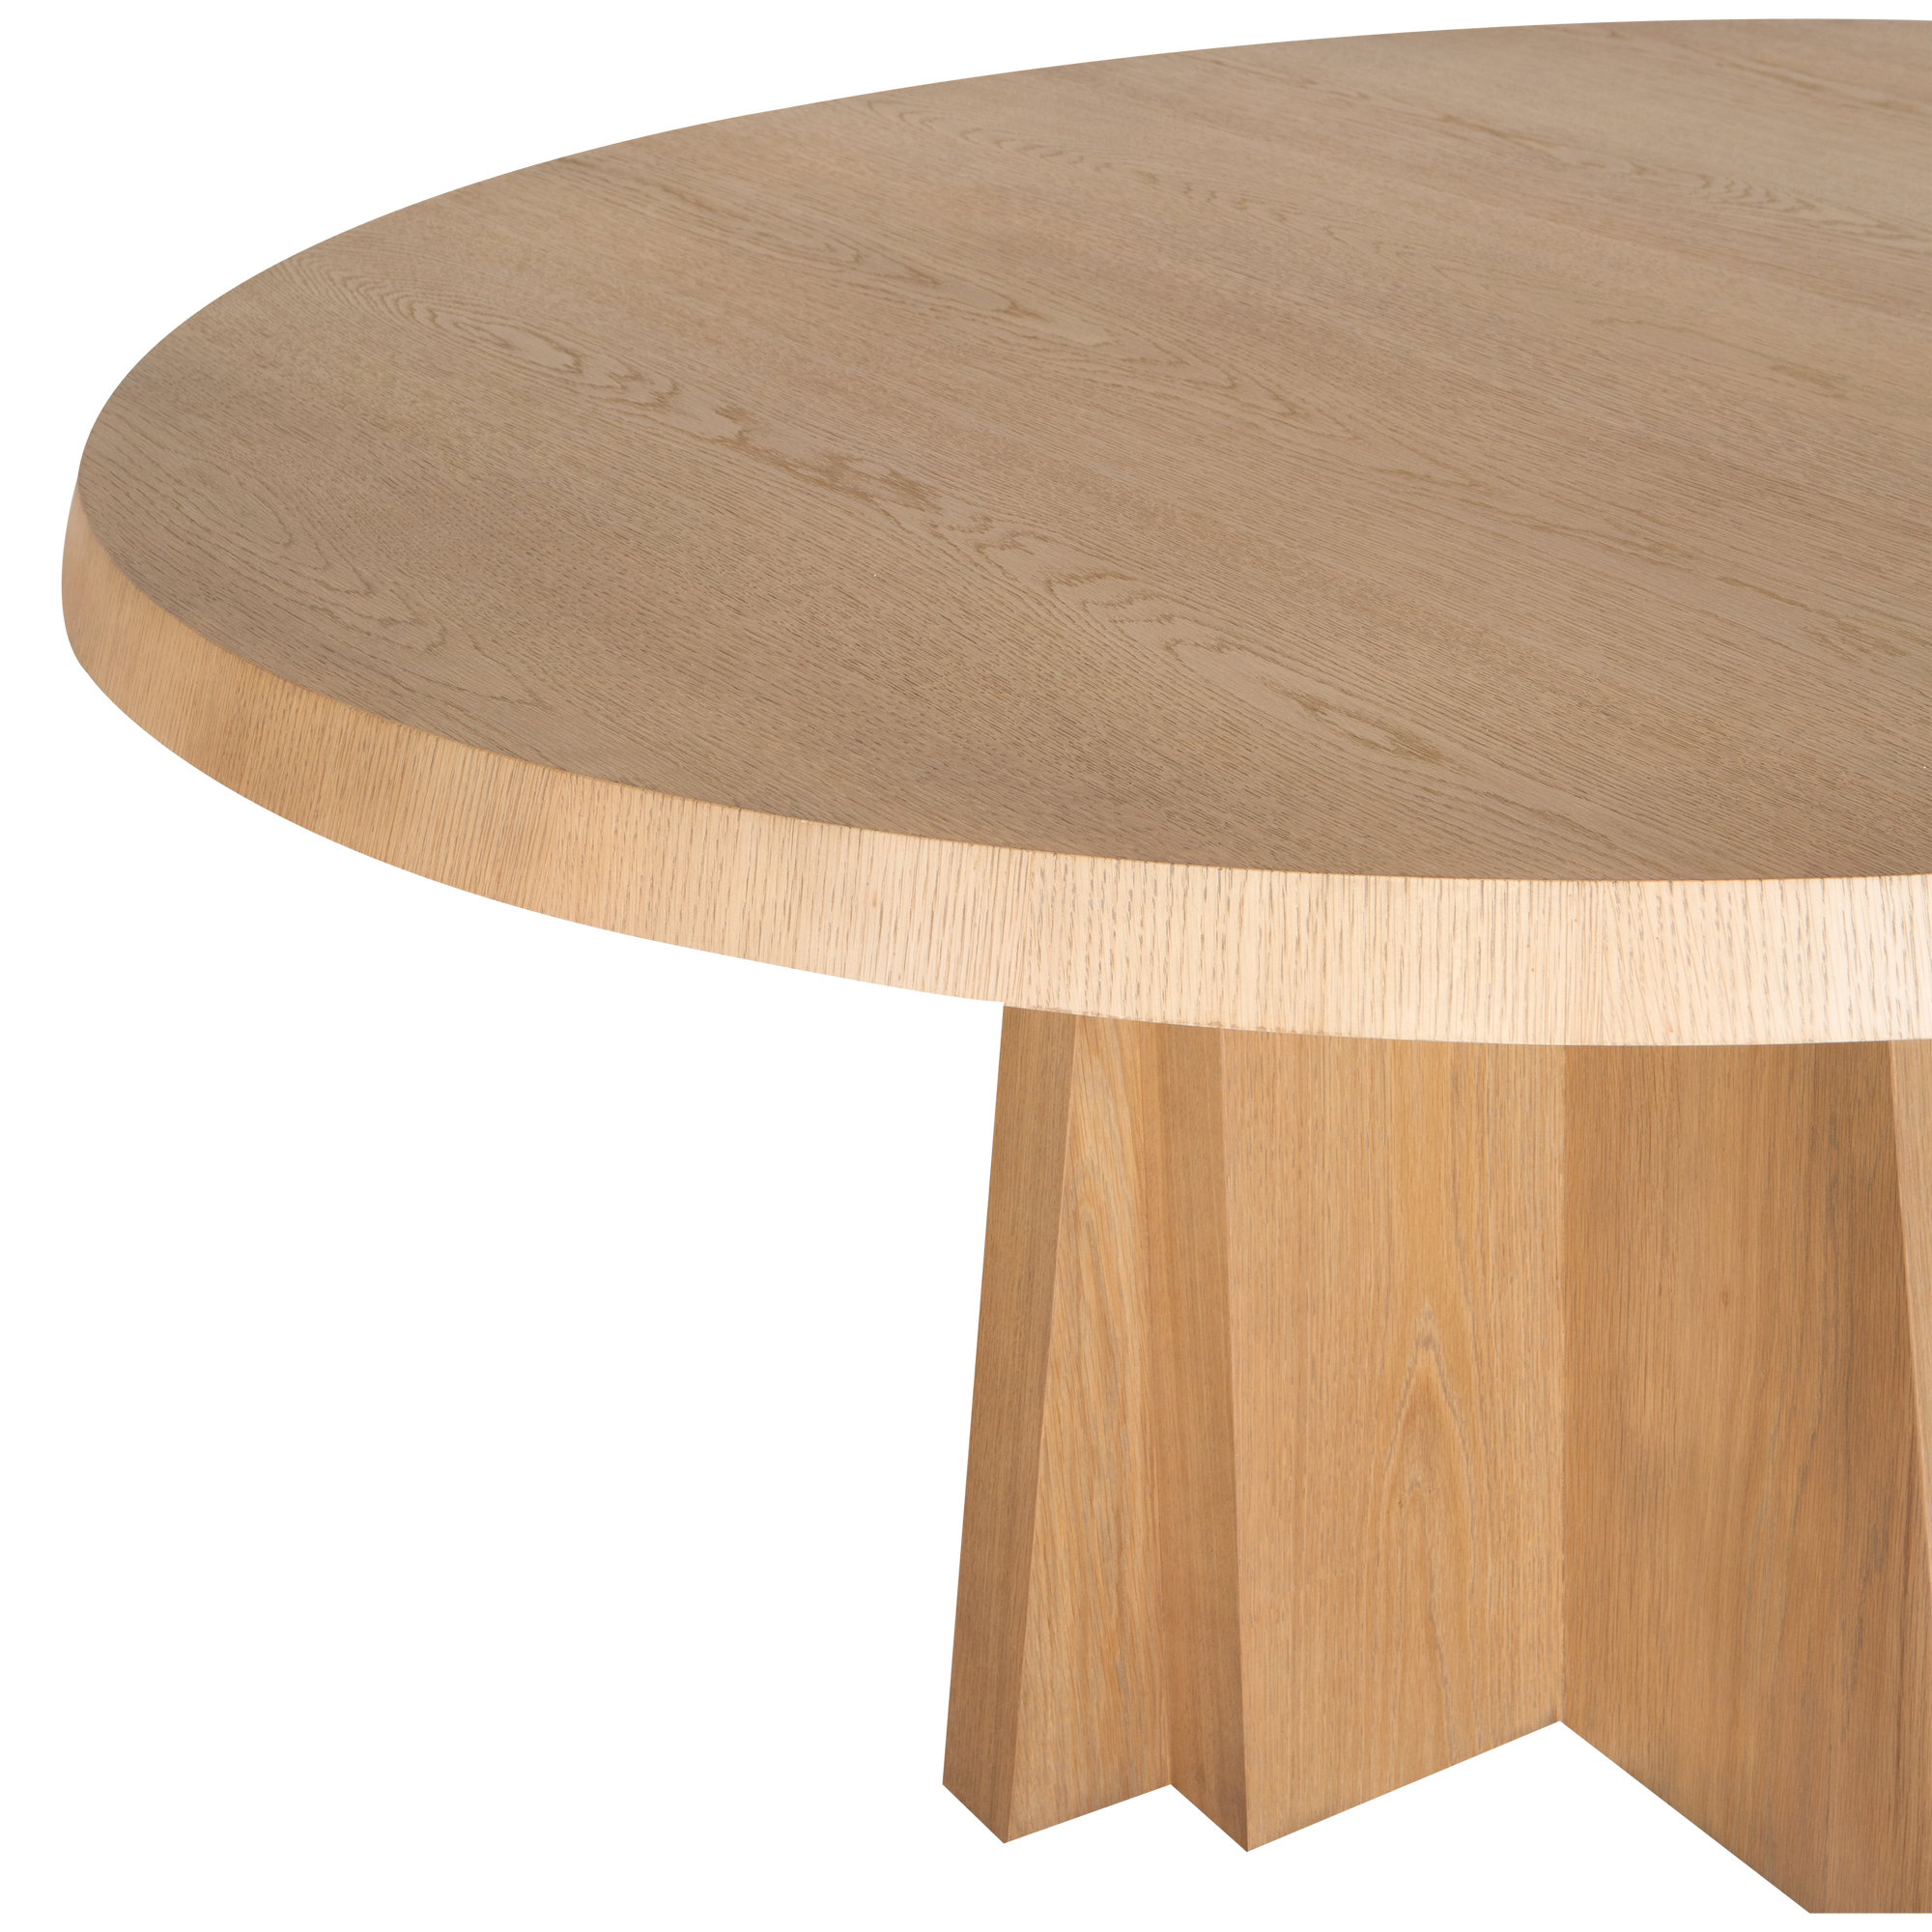 The Oblique Round Dining Table draws inspiration from the raw power and geometric precision of 1960s Brutalist architecture.